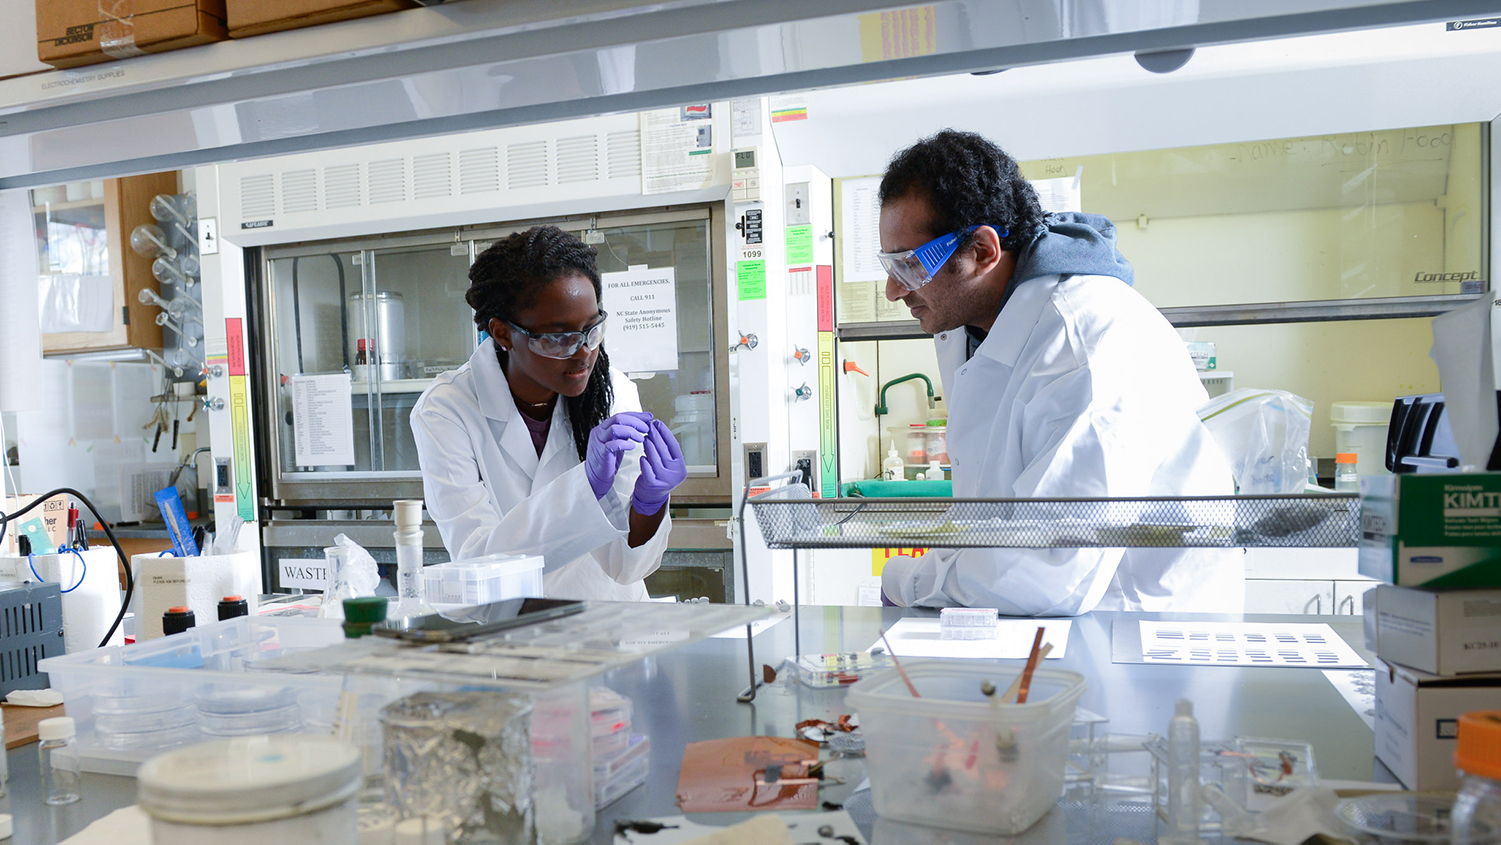 Two students in white lab coats examine a sample in a lab.